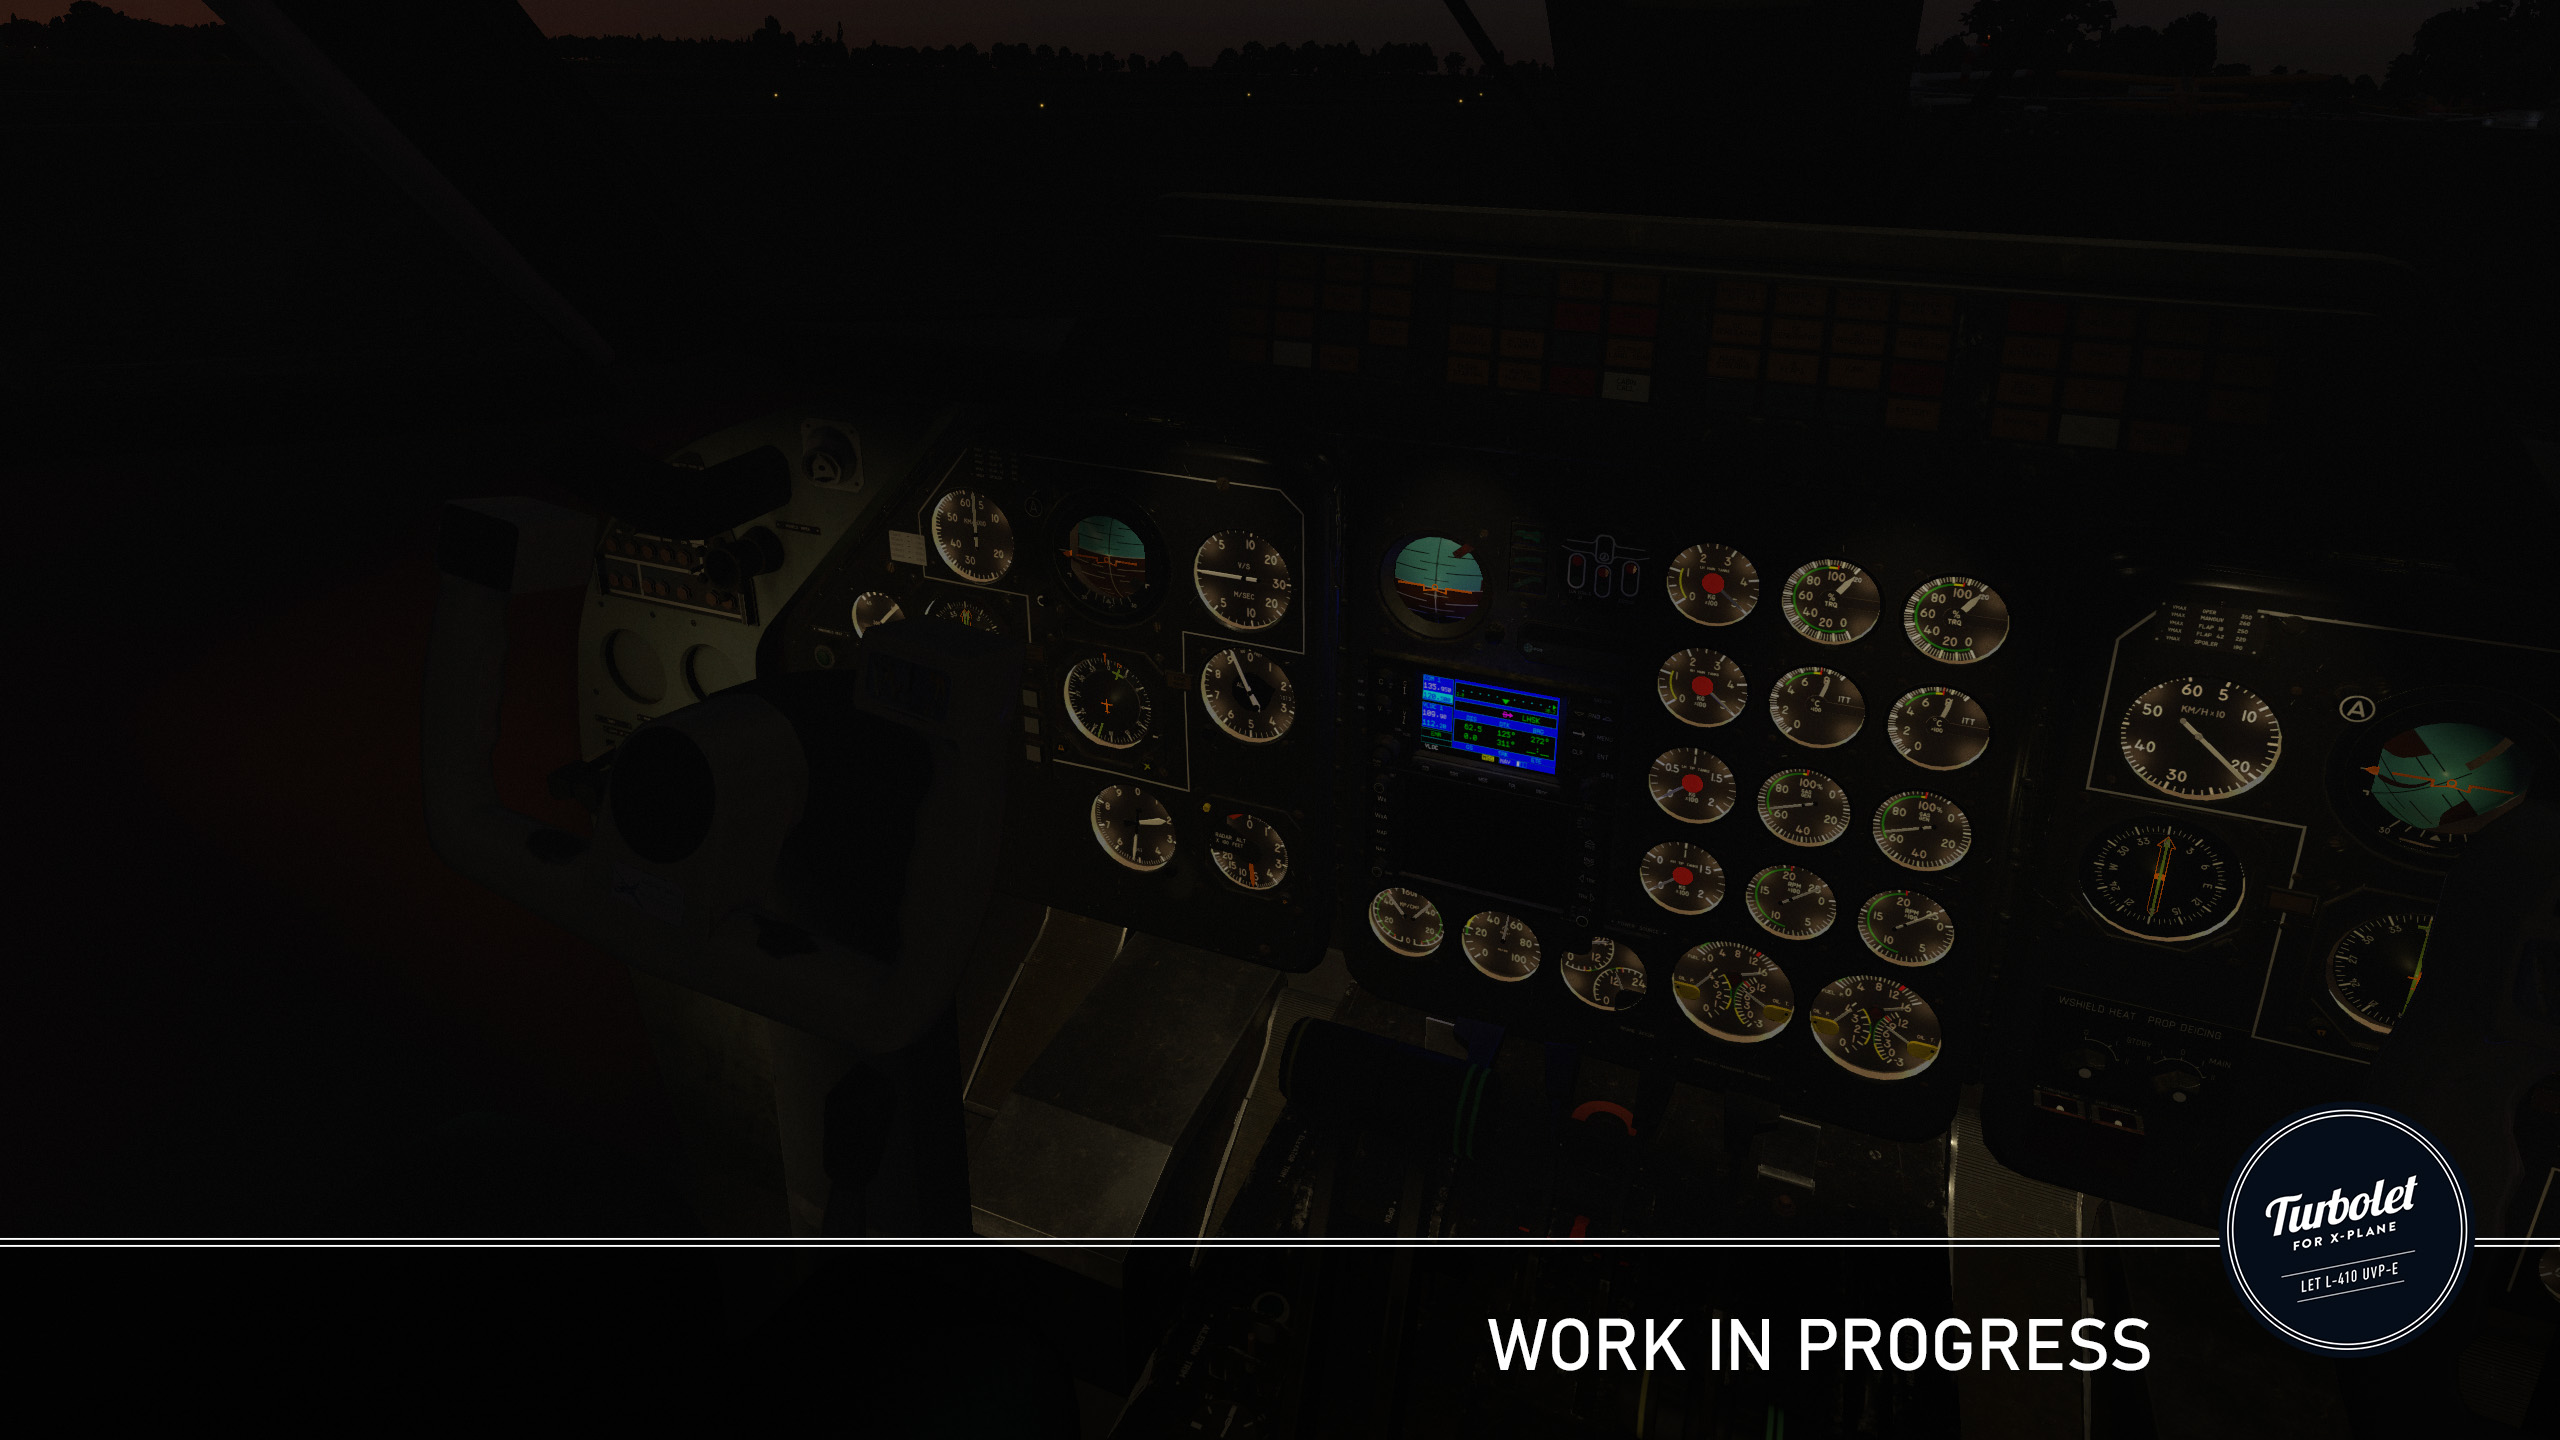 Let L-410 Turbolet - Visual update #2 - cockpit and cabin